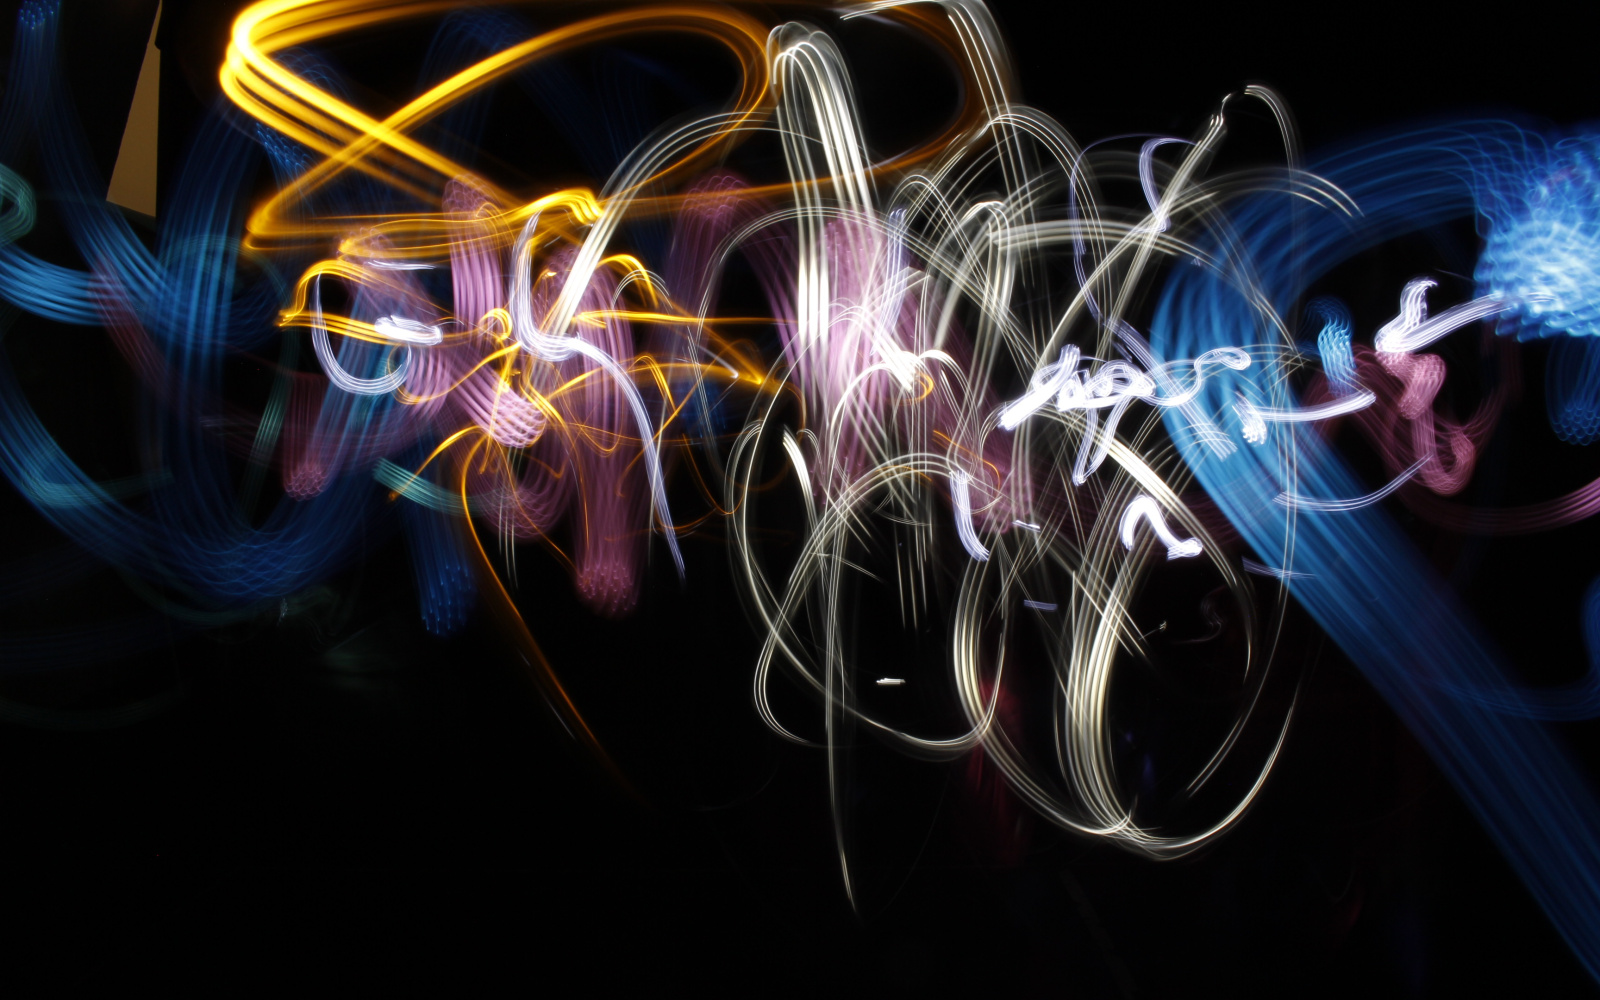 Using a flash light and a camera with longterm exposure, a light graffiti has been created. In abstract forms there are whirling yellow, white and blue stripes across the black background.